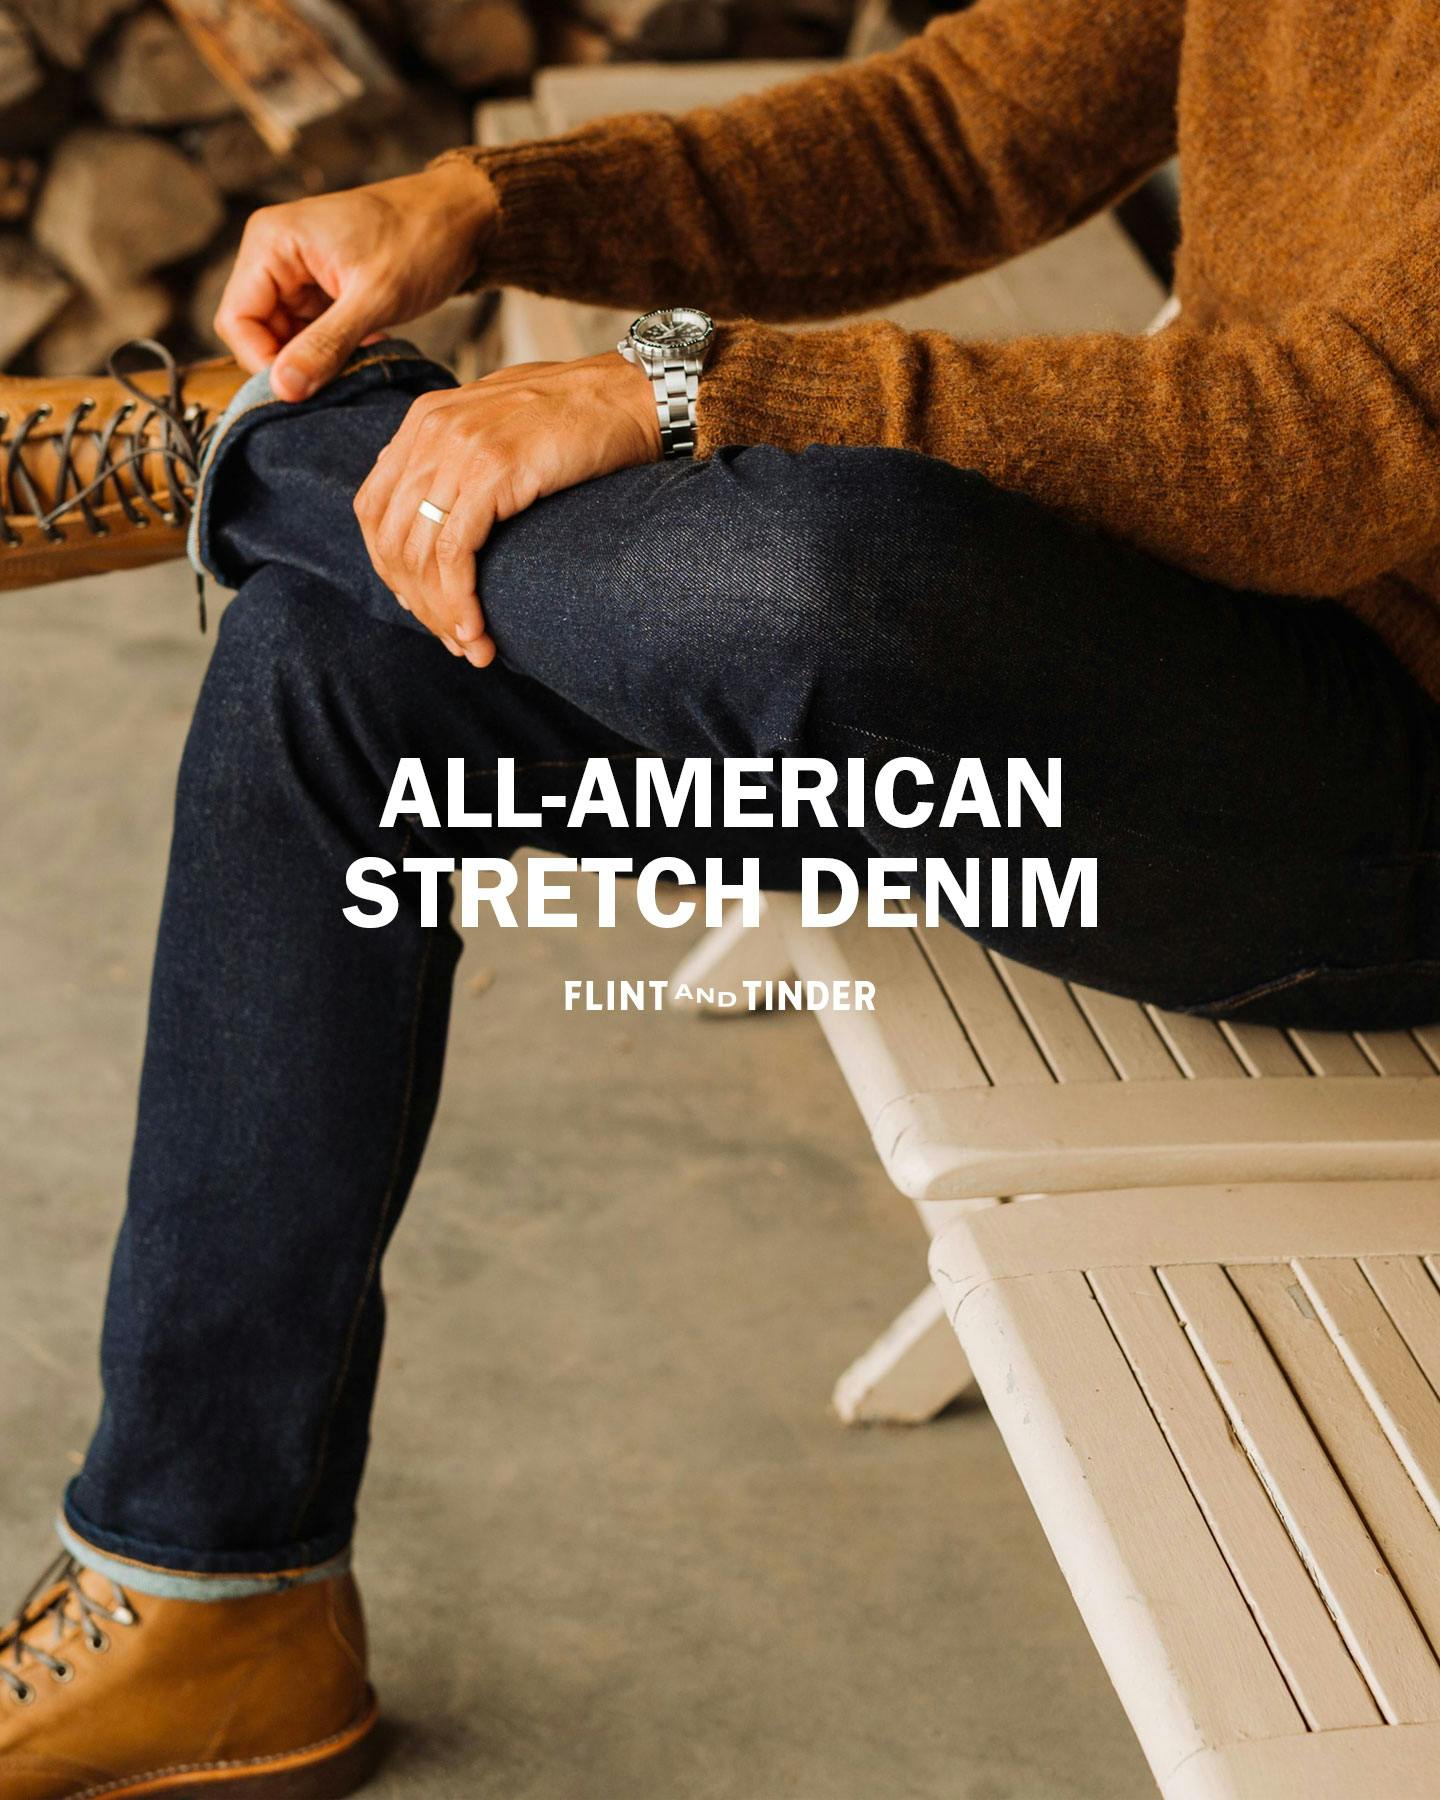 Flint and Tinder: All-American Jeans